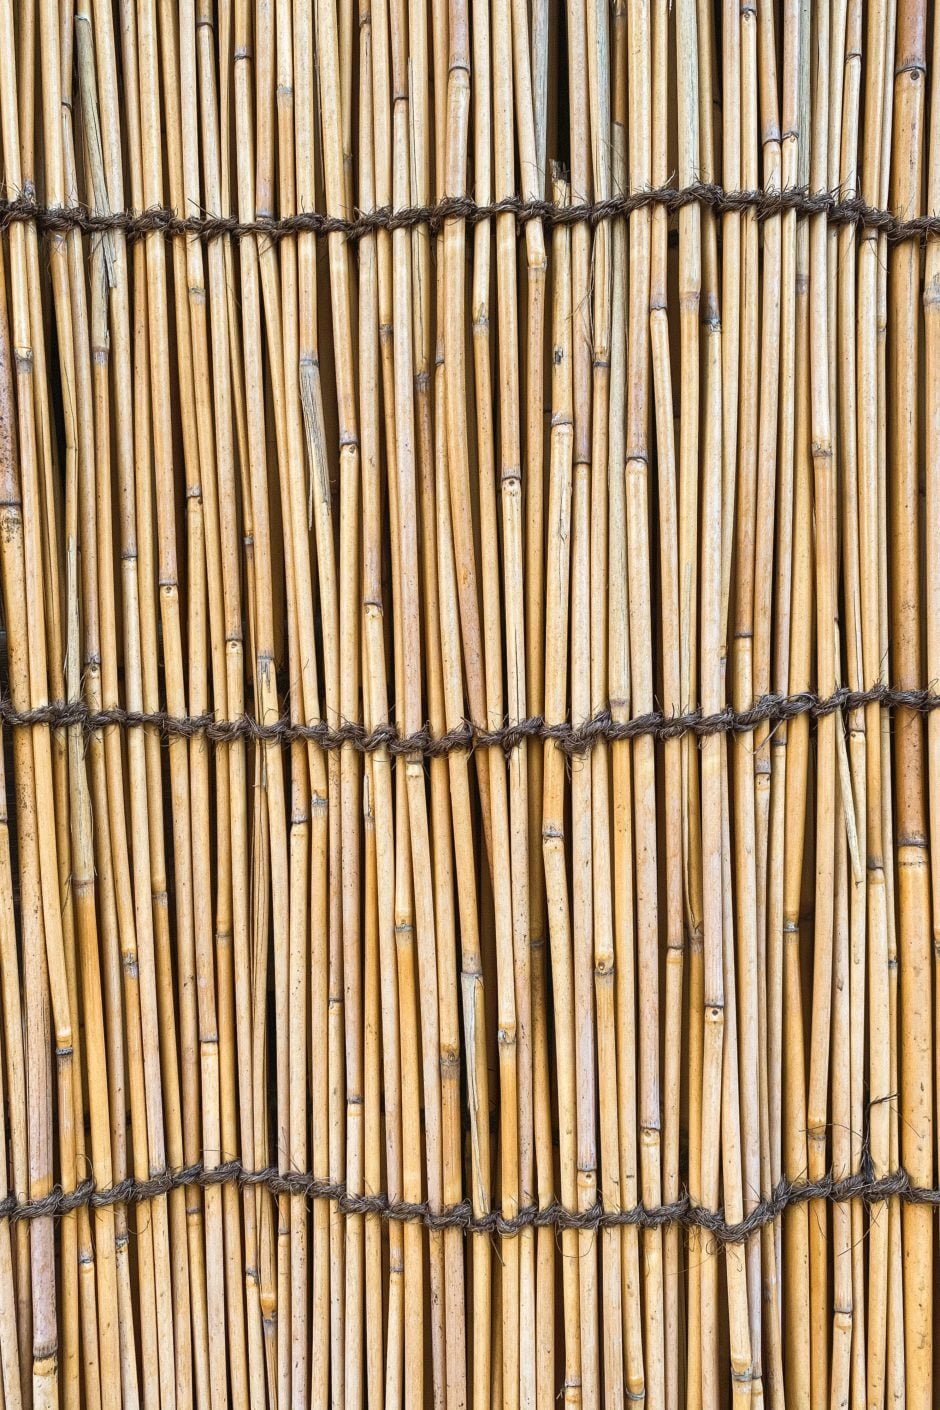 Background of thin bamboo stalks for phone - WallpapersUpdate